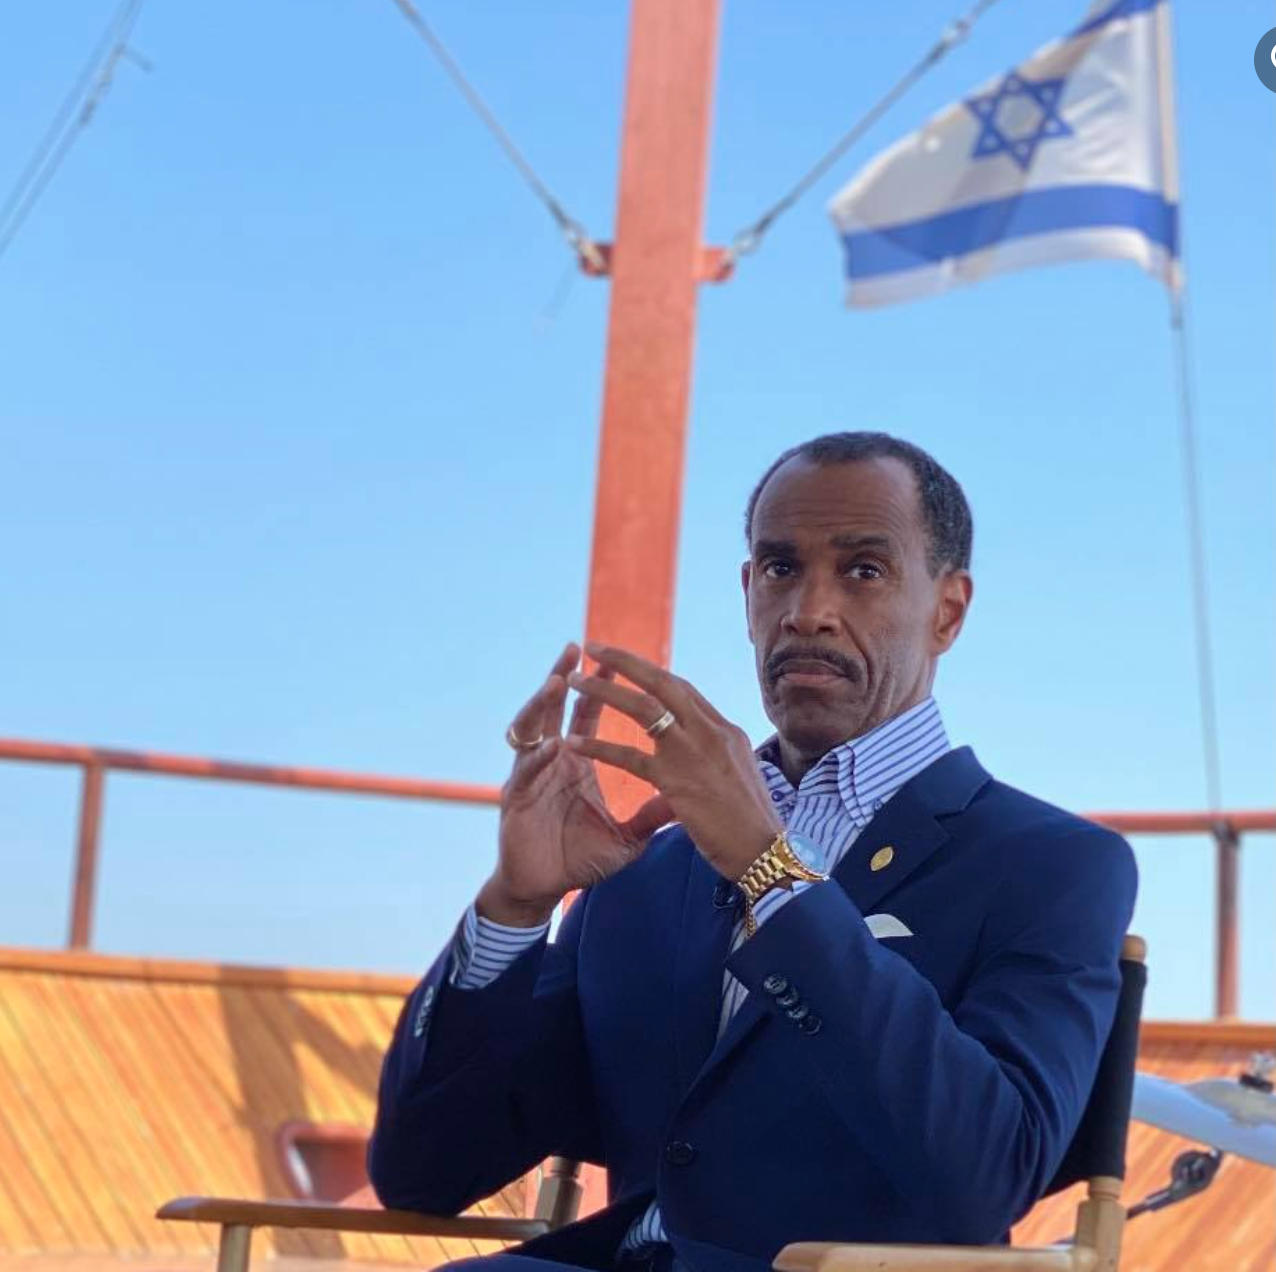 Pentacostal minister talks about God, Christianity and his place in Israel